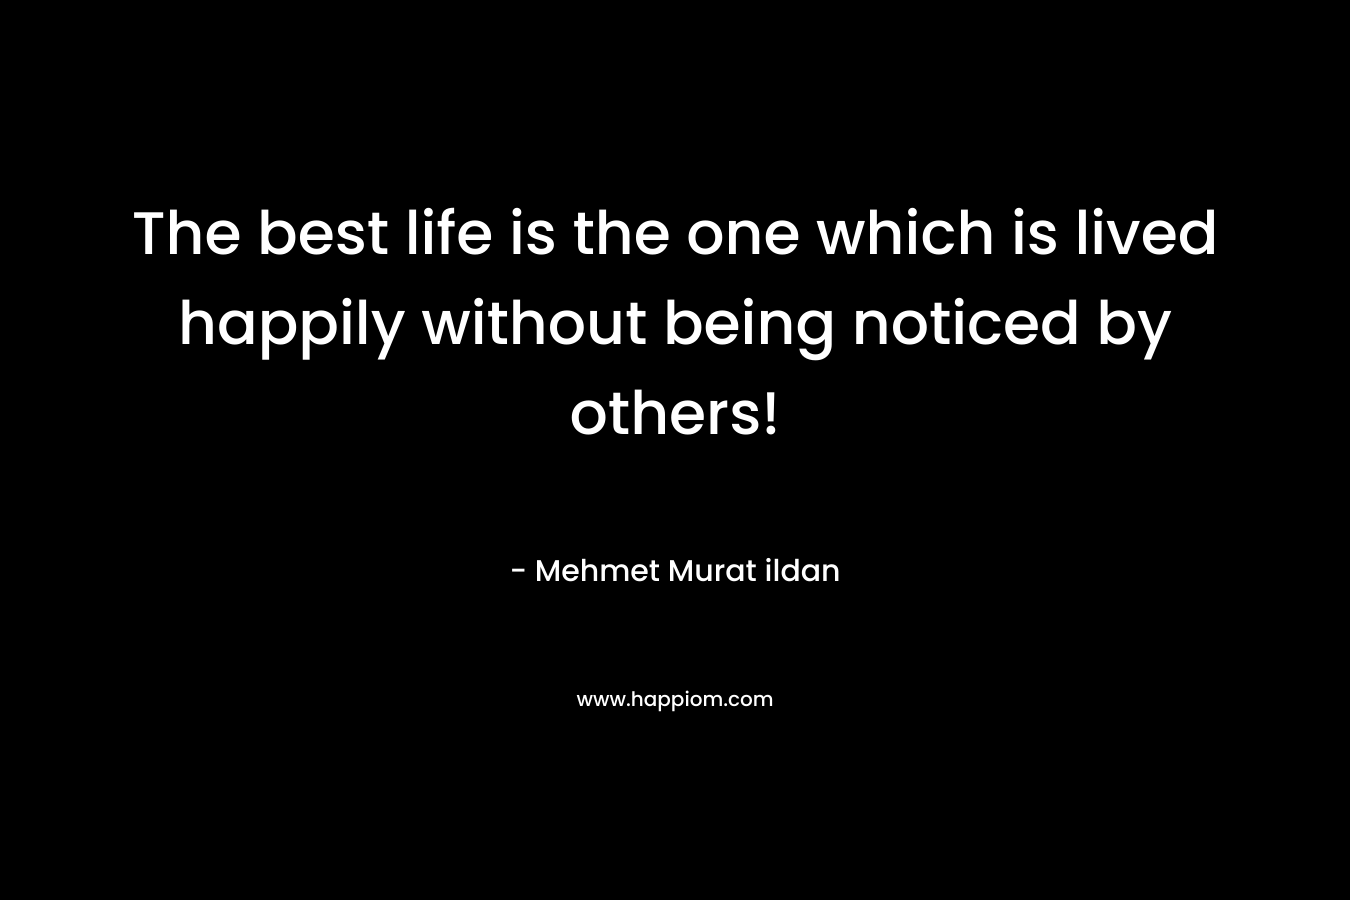 The best life is the one which is lived happily without being noticed by others! – Mehmet Murat ildan